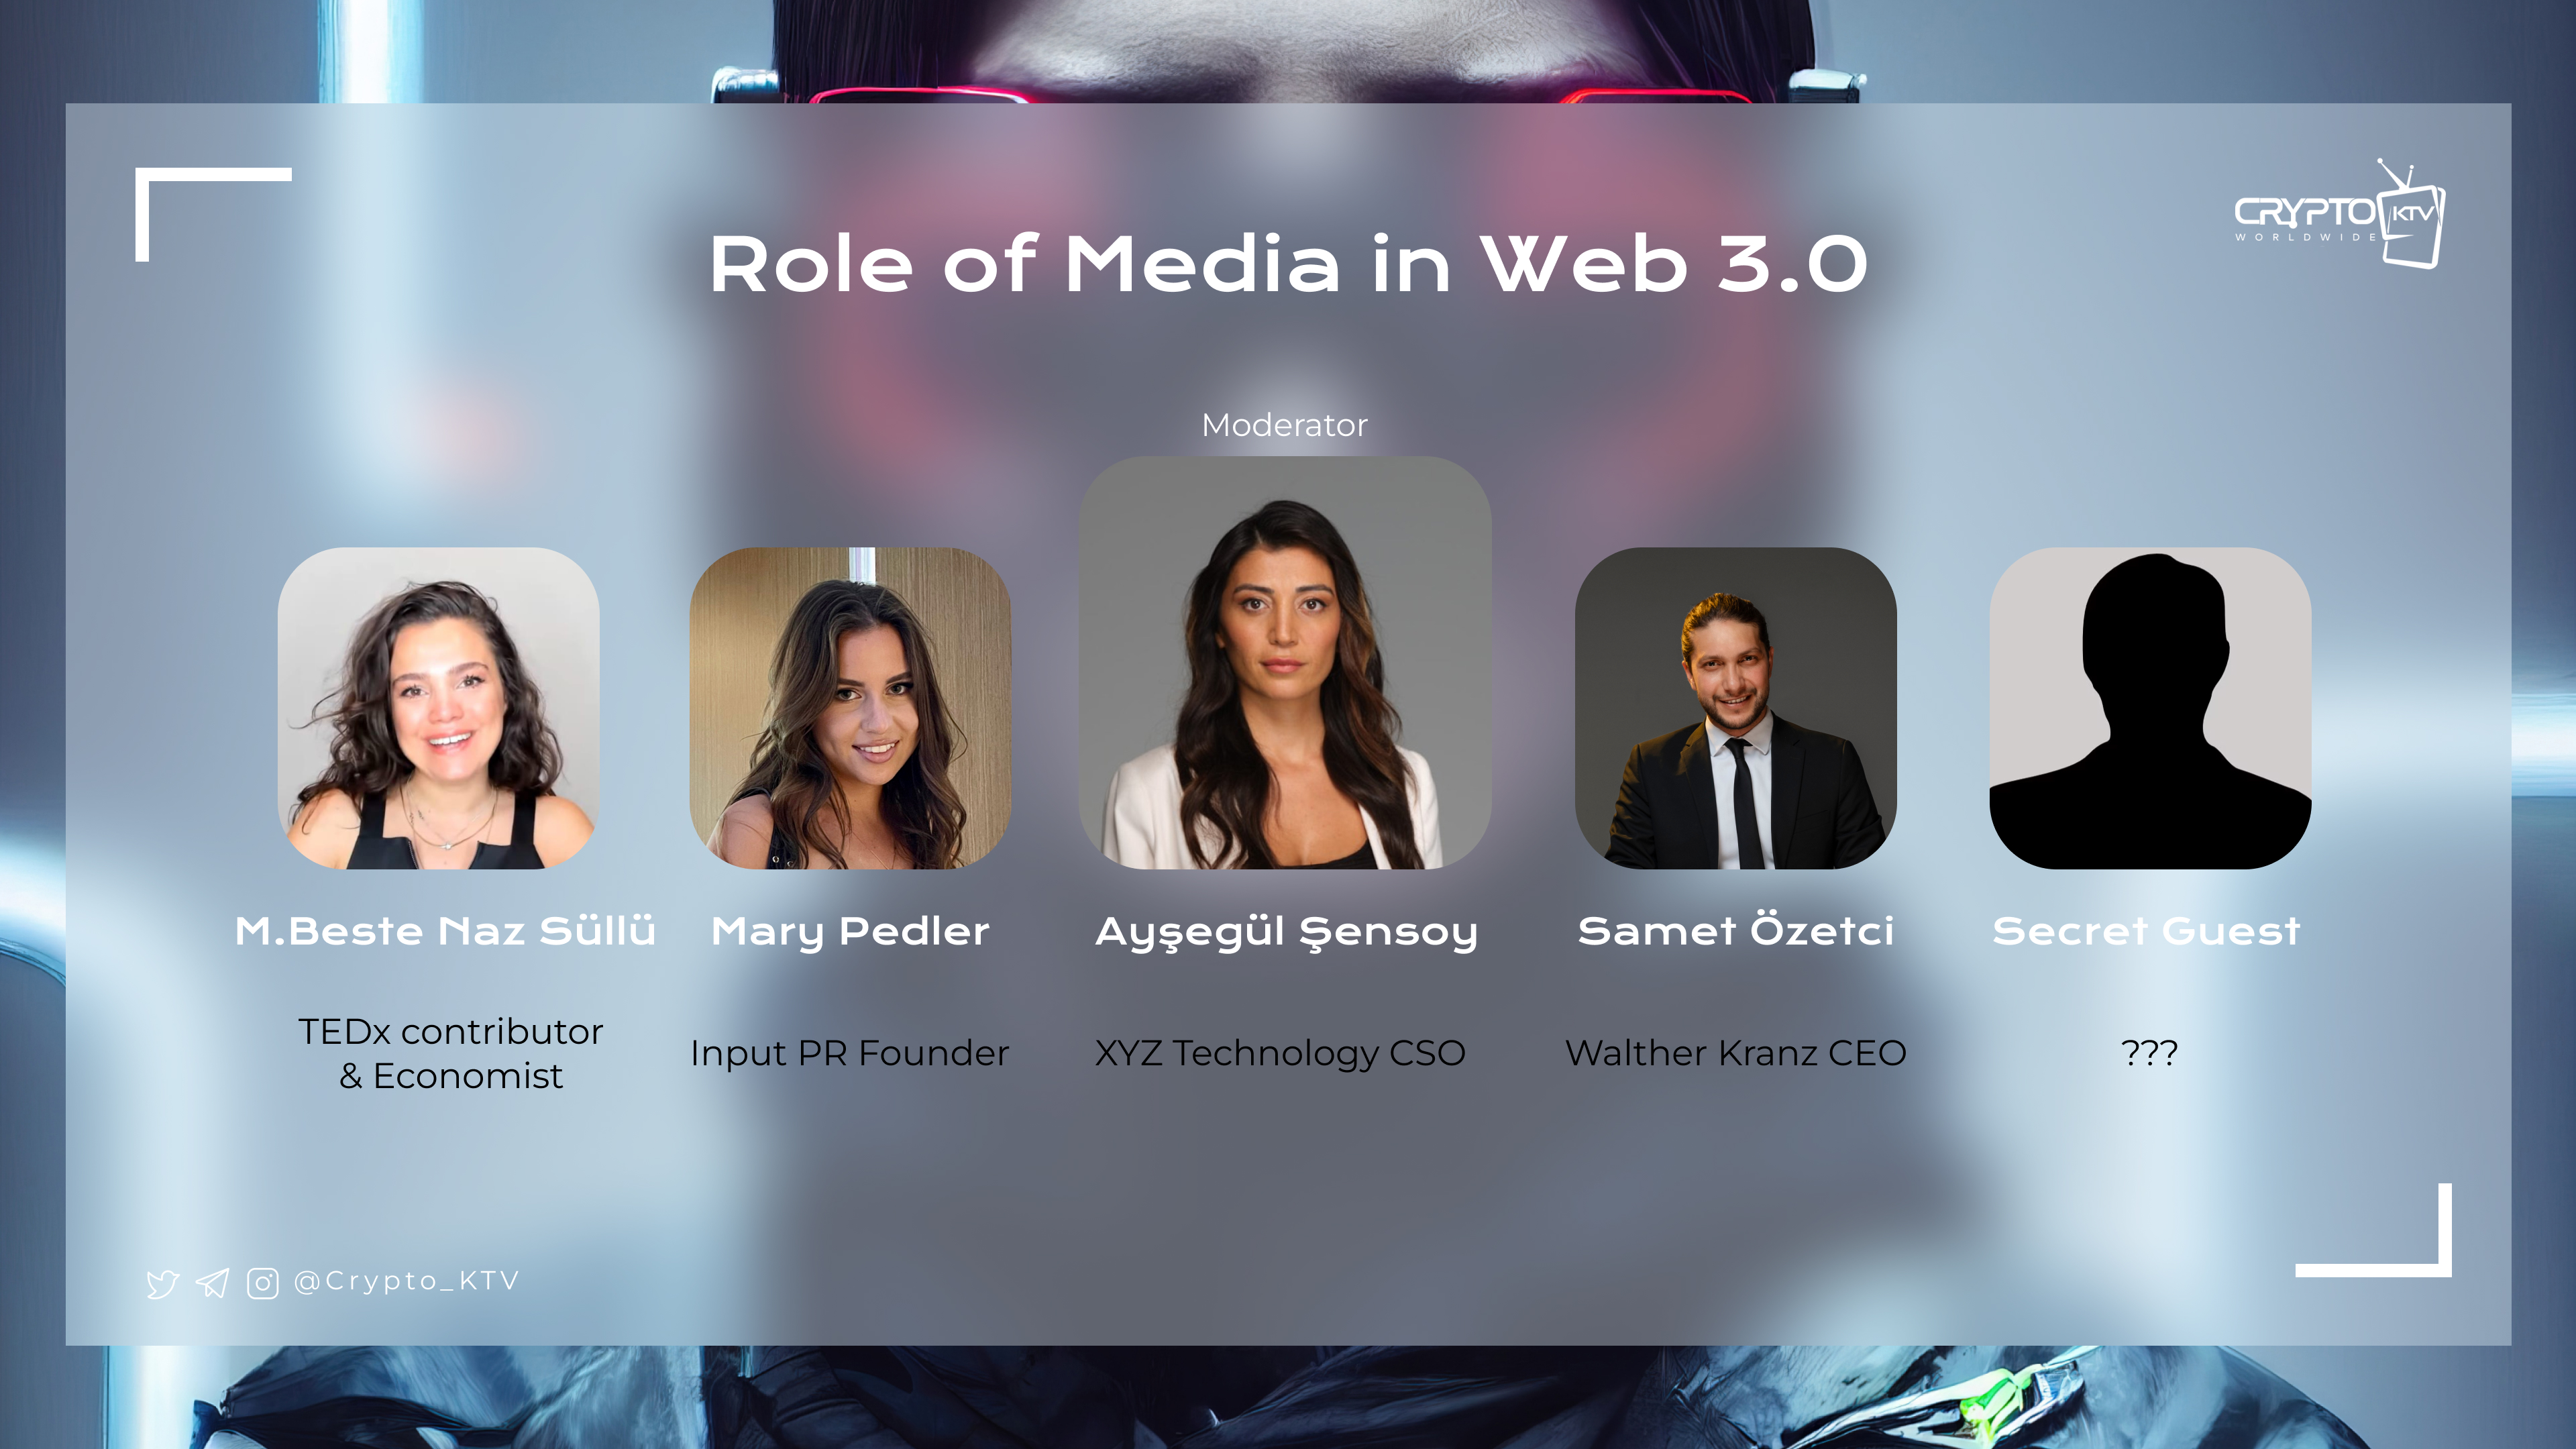 The role of media in Web 3.0